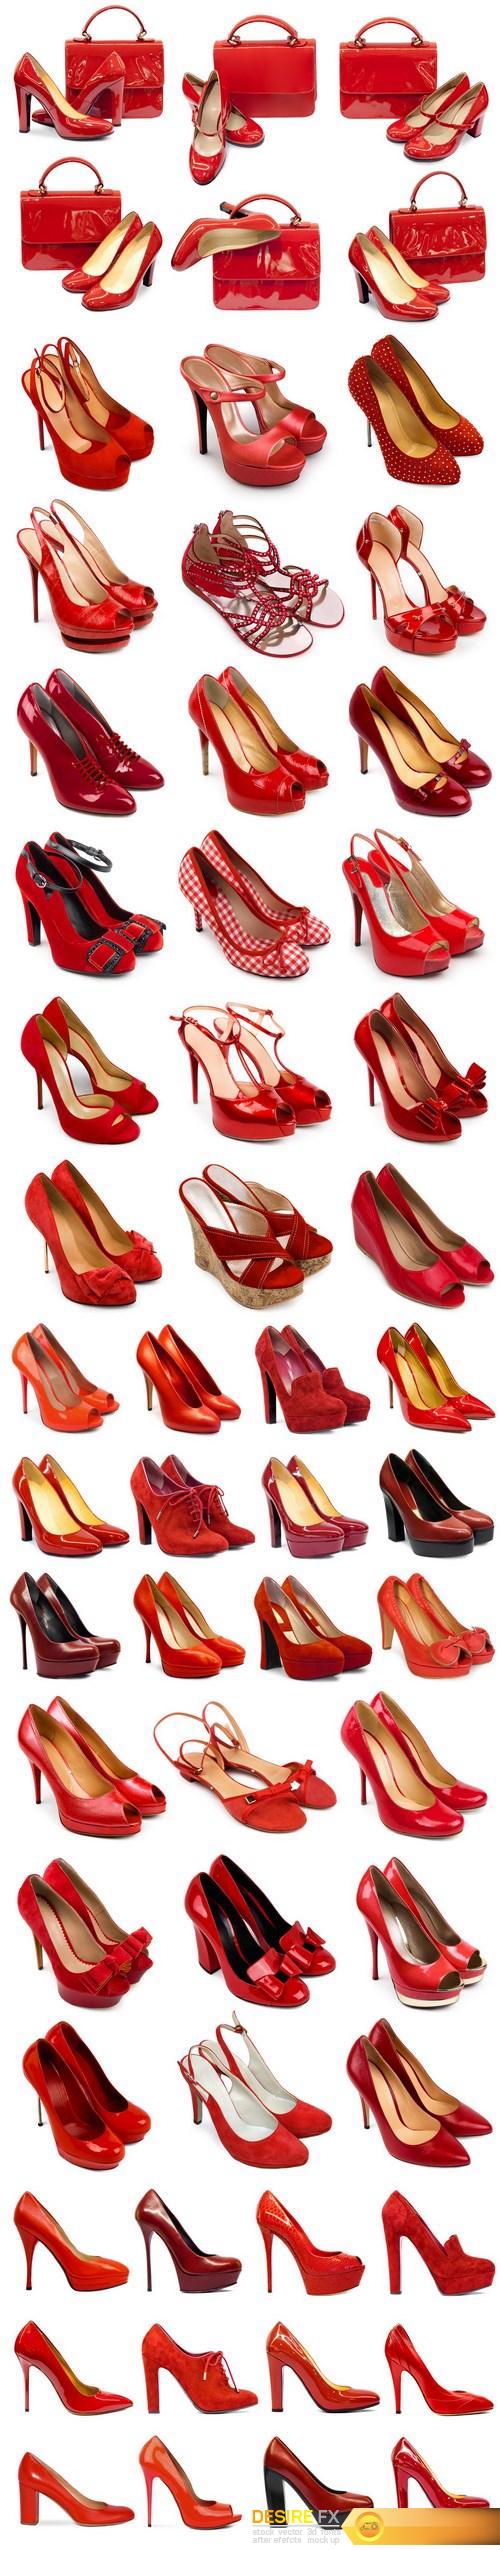 Red female shoes and handbags - 6xUHQ JPEG Photo Stock